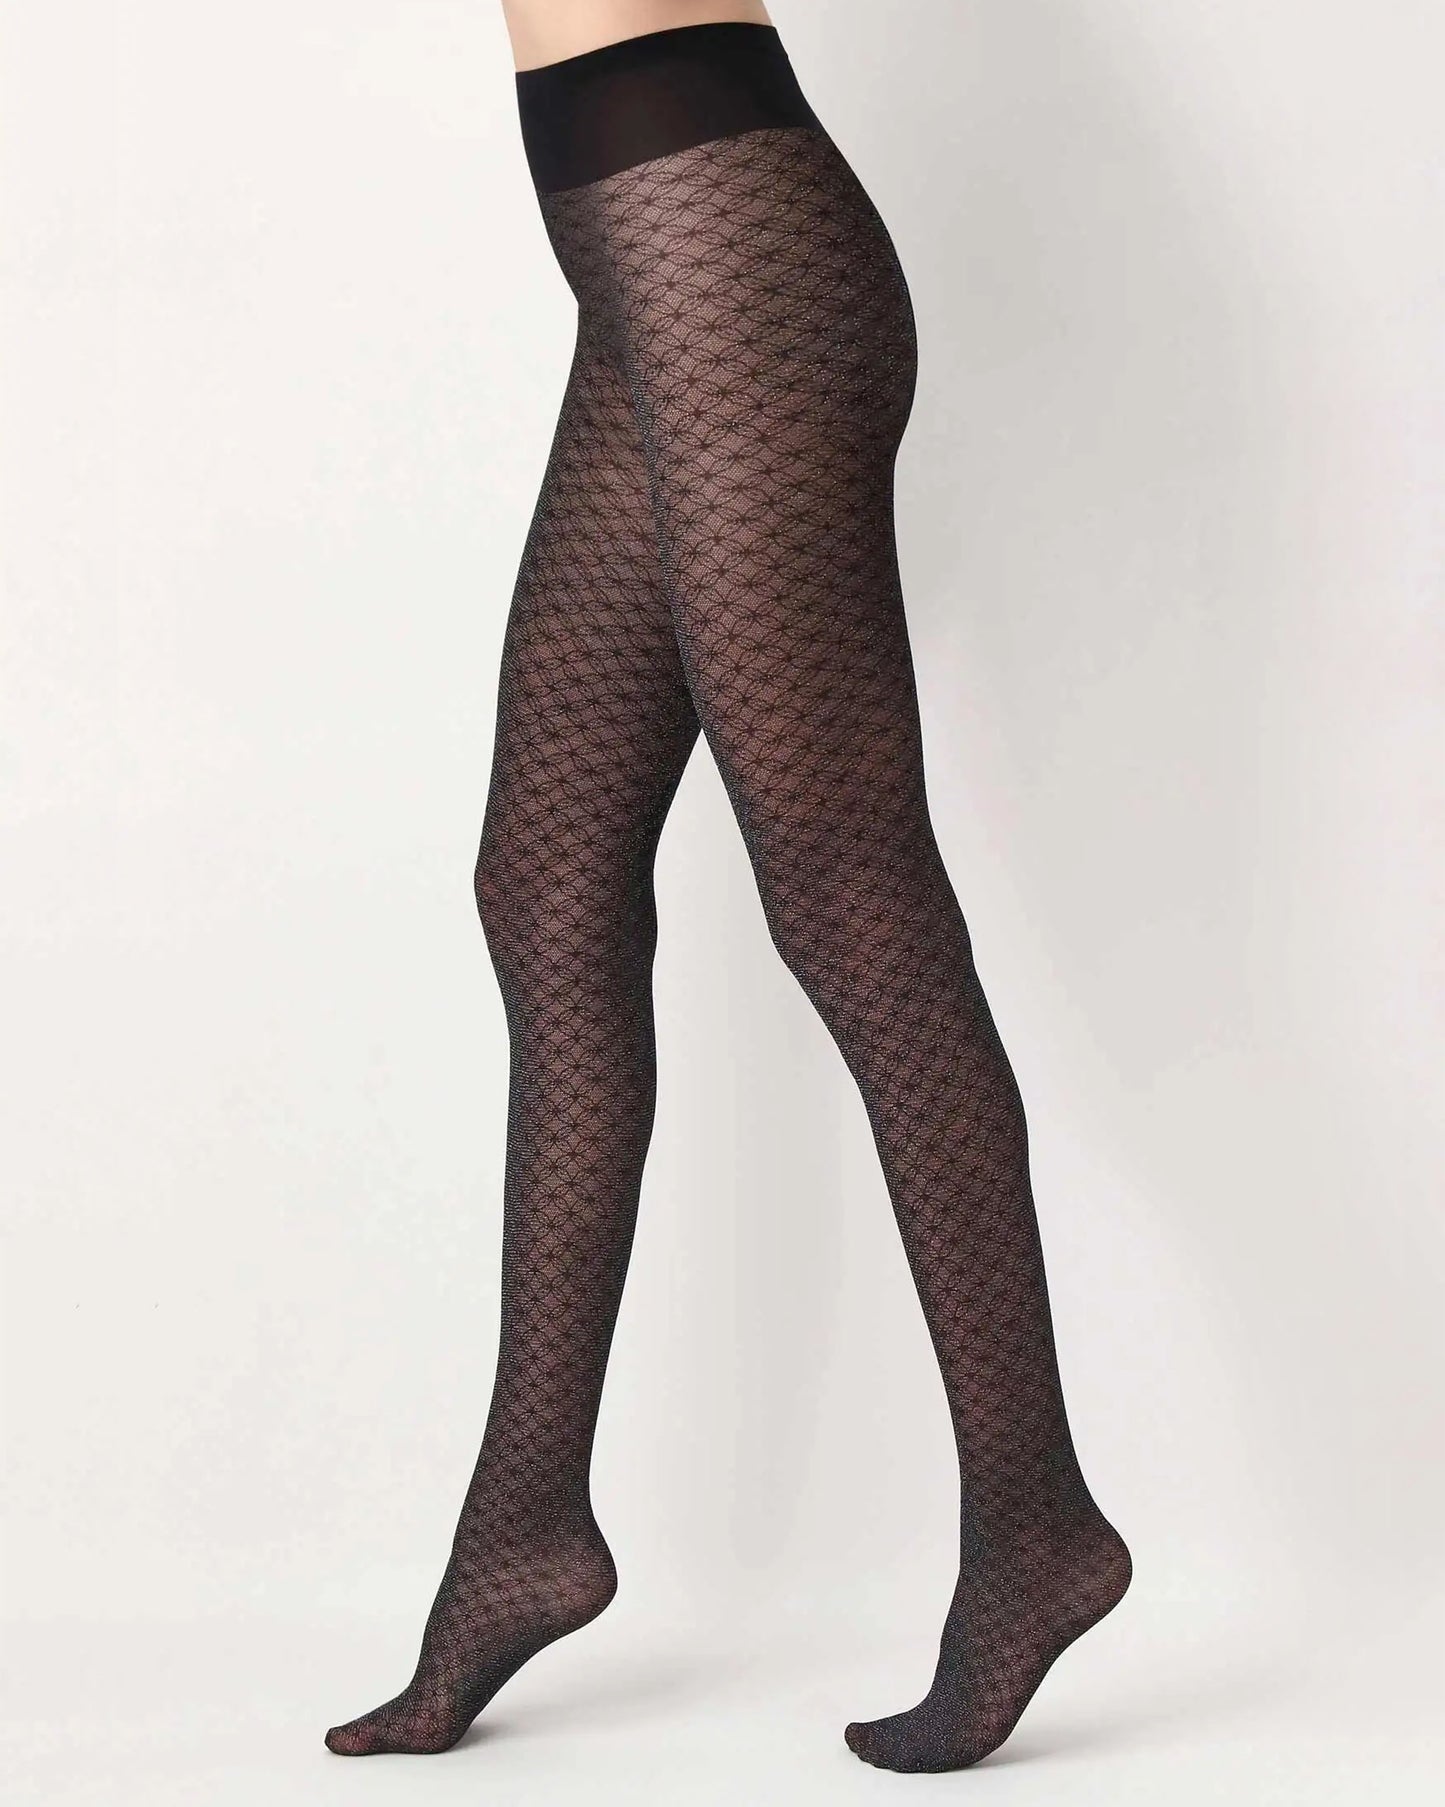 Oroblù Sparkly Lace Tights - Black semi sheer fashion tights with an all over delicate geometric lace style pattern in silver lamé